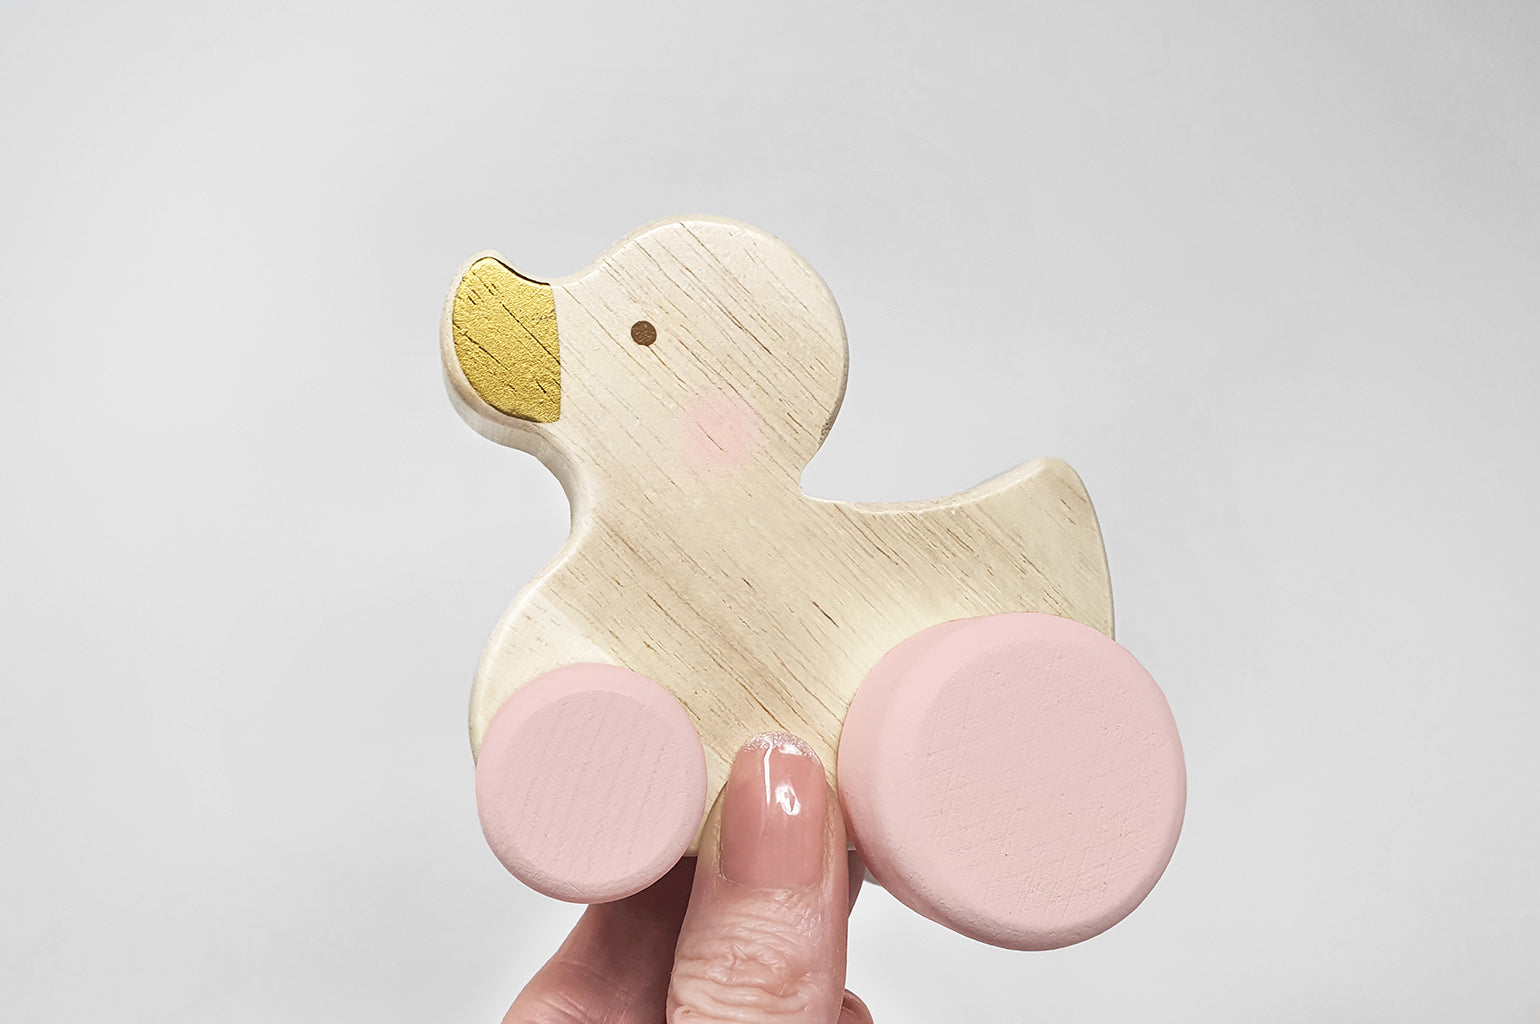 Wooden Toy, Toddler Push Toy, Pink Wooden Duck Toy, Best Push Toy for Girls,  Wooden Push Toy, Wood Kids Toys, Wooden Toys for Girl 